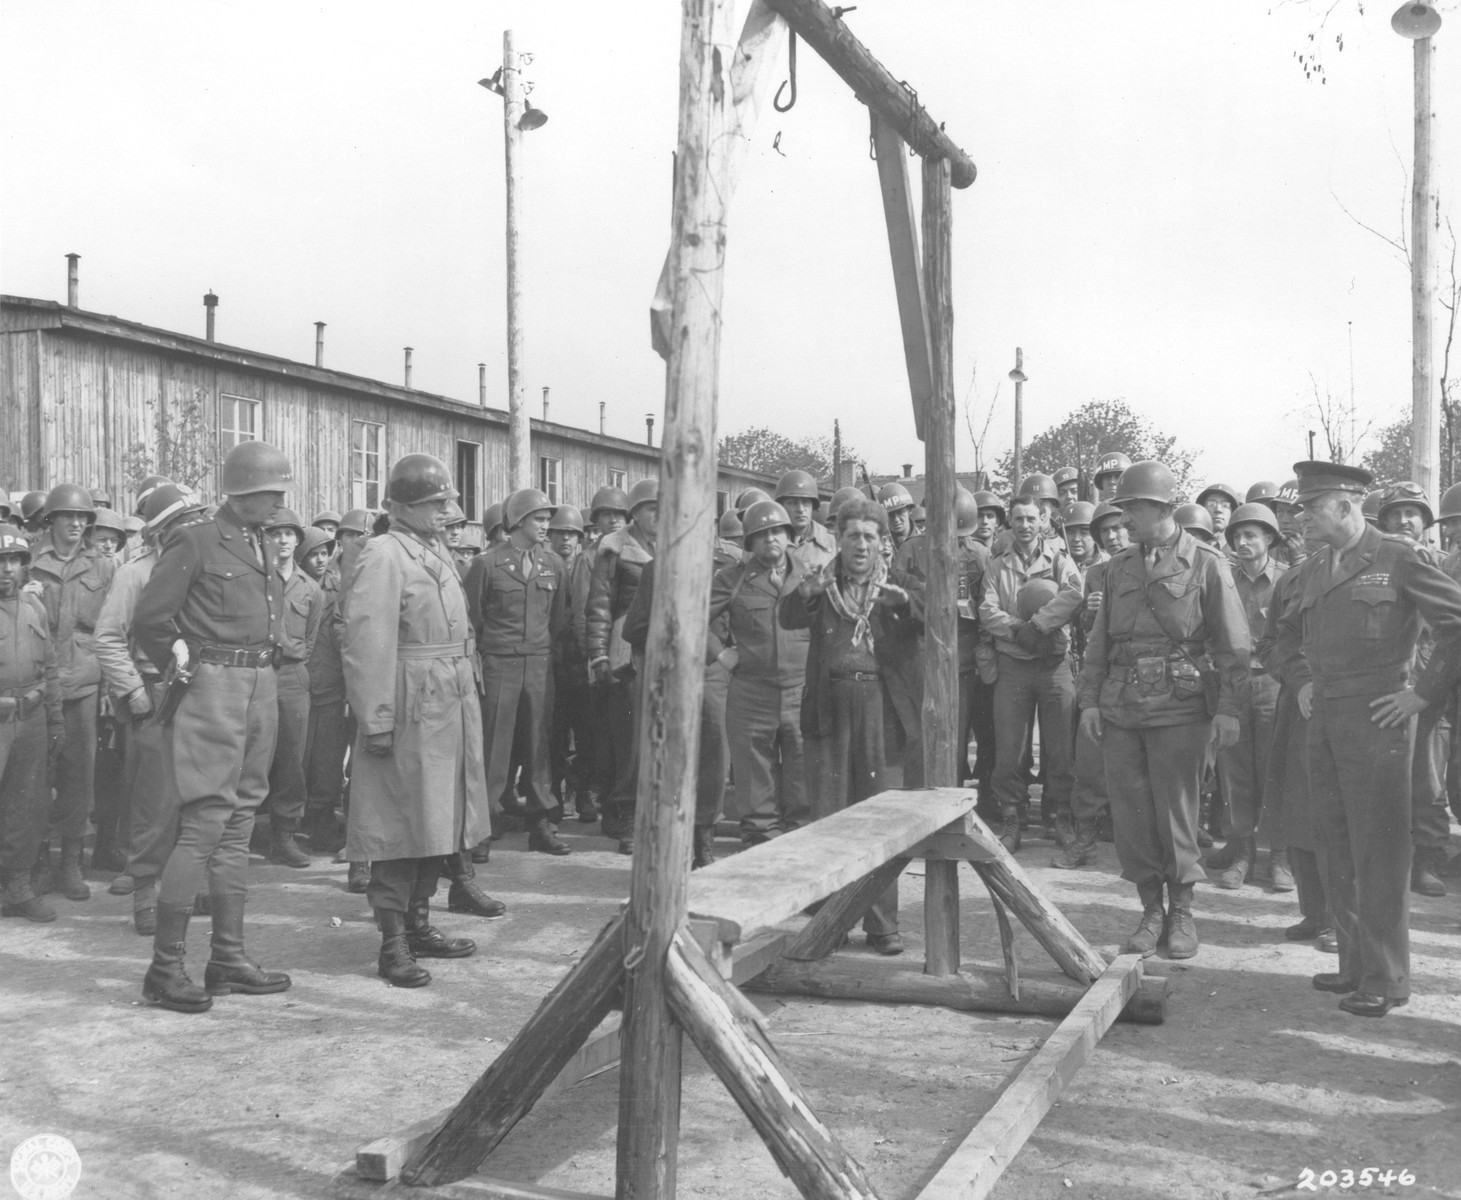 An Austrian-Jewish survivor, who had been deported from Holland, points out the gallows in Ohrdruf to General Dwight D. Eisenhower and a party of high ranking U.S. officers, including General Omar N. Bradley, Lt. Gen. George S. Patton, and Major General Troy H. Middleton, during an official tour of the newly liberated concentration camp.

The Austrian Jewish survivor is Ignaz Feldmann (wearing a dark coat, with a scarf around his neck) . He was a survivor of  Westerbork, Terezin, Auschwitz, and Ohrdruf camps.   He was also a player on the famed Hakoah Vienna soccer teams of the 1920s and 30s.